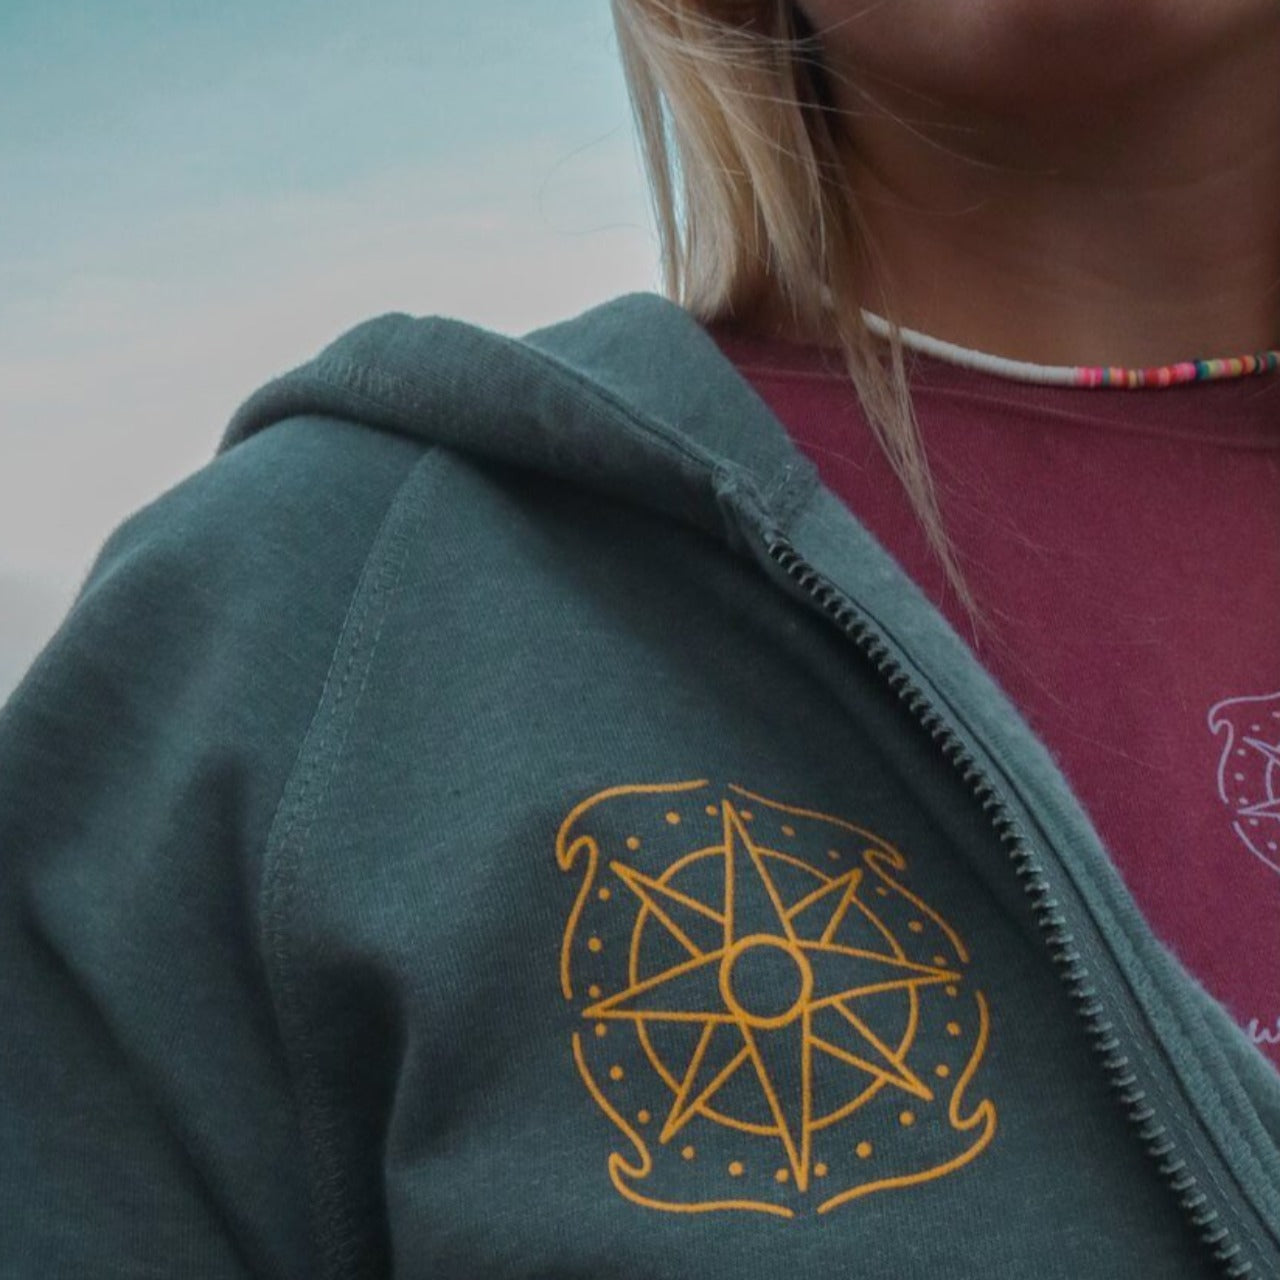 Wandering Waves Surf Company compass logo on front of "Chase The Sun" zip up hoodie